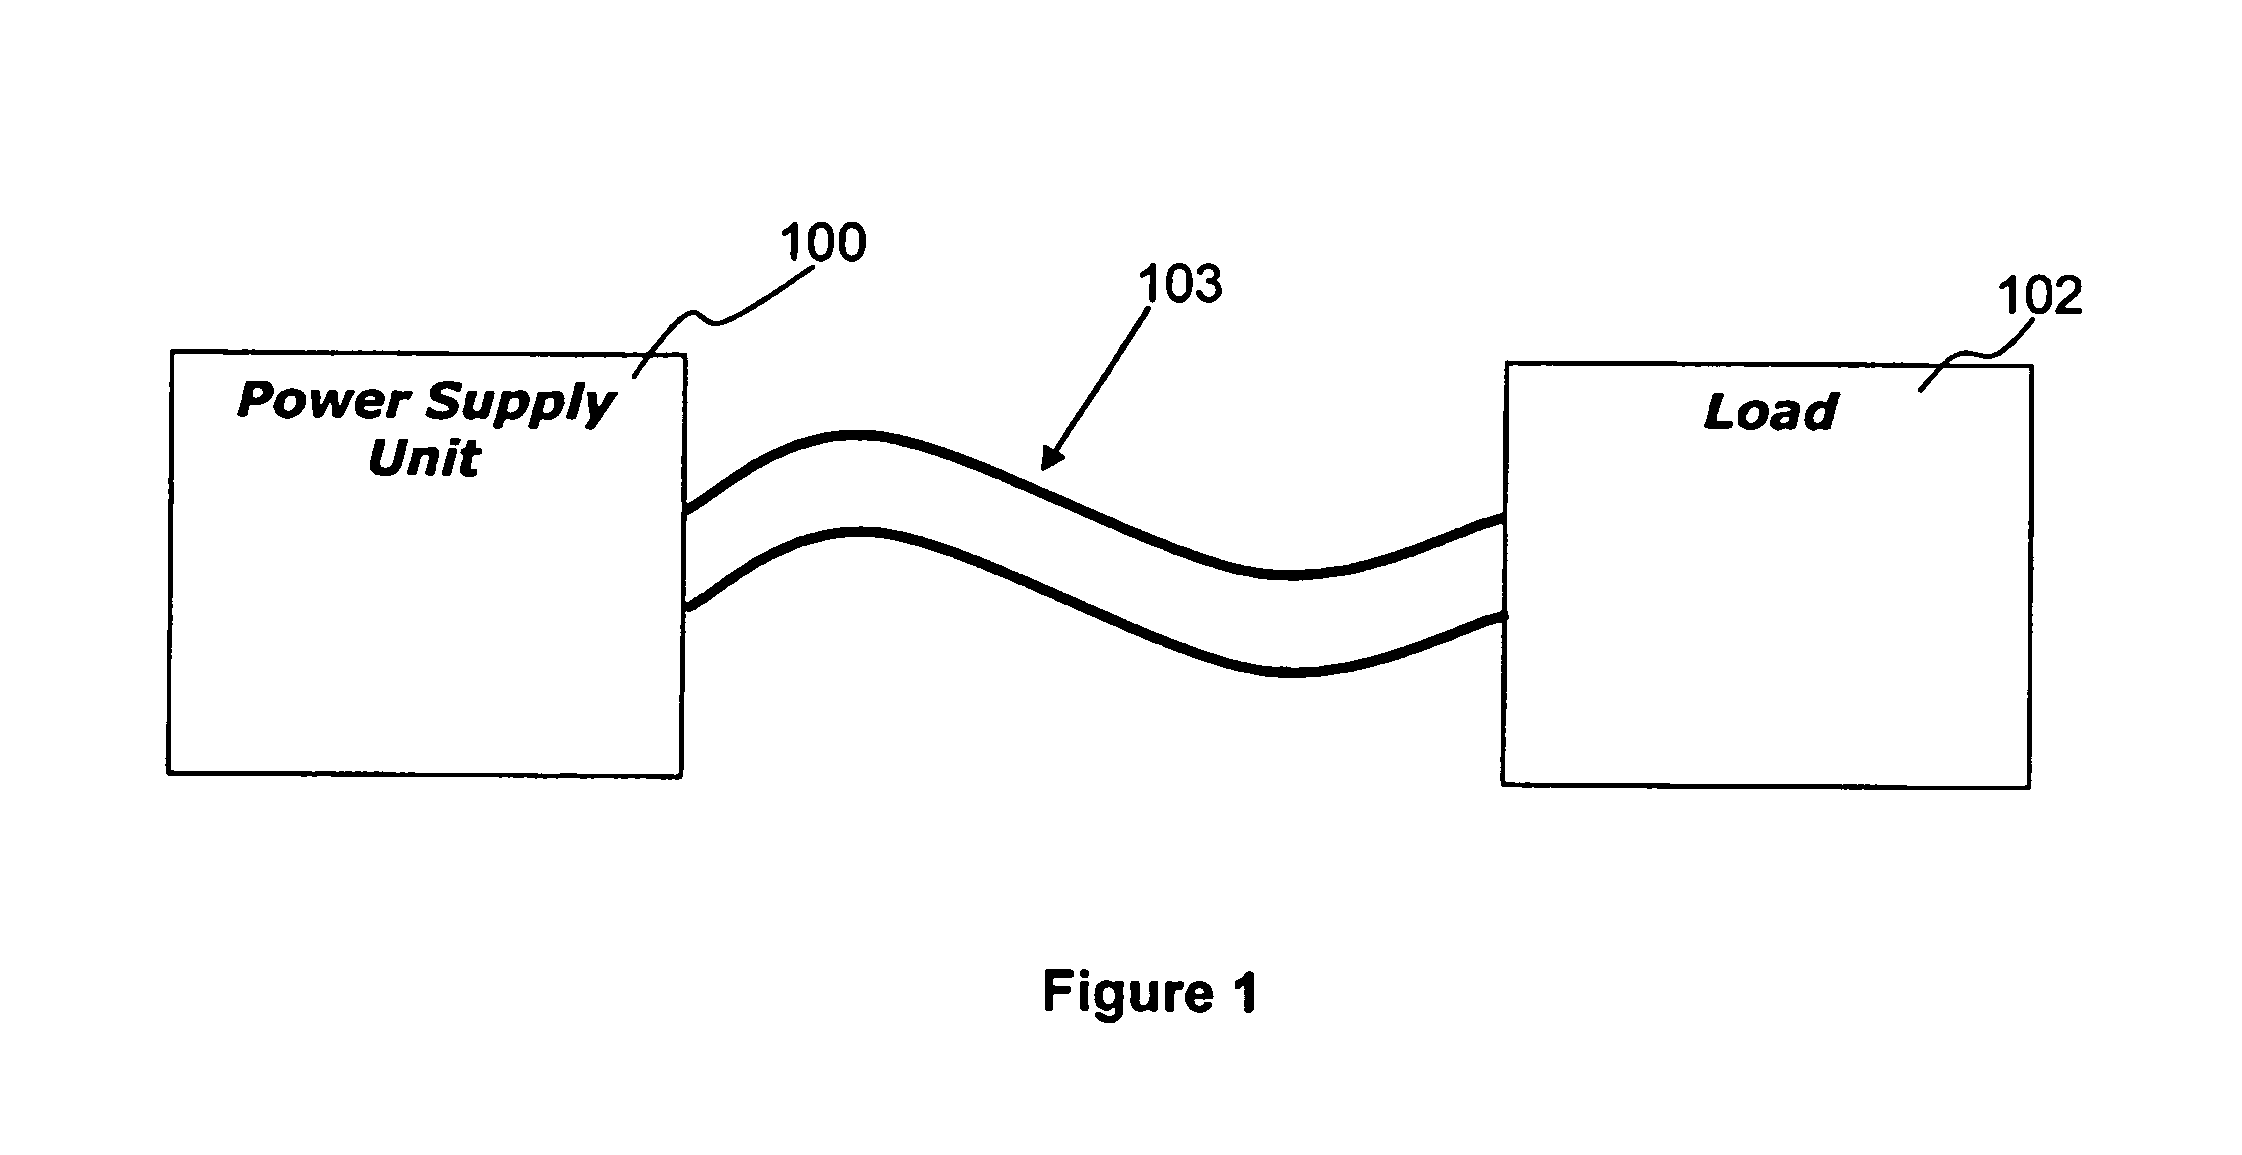 Plug movable to a plurality of positions depending upon characteristics of a load device